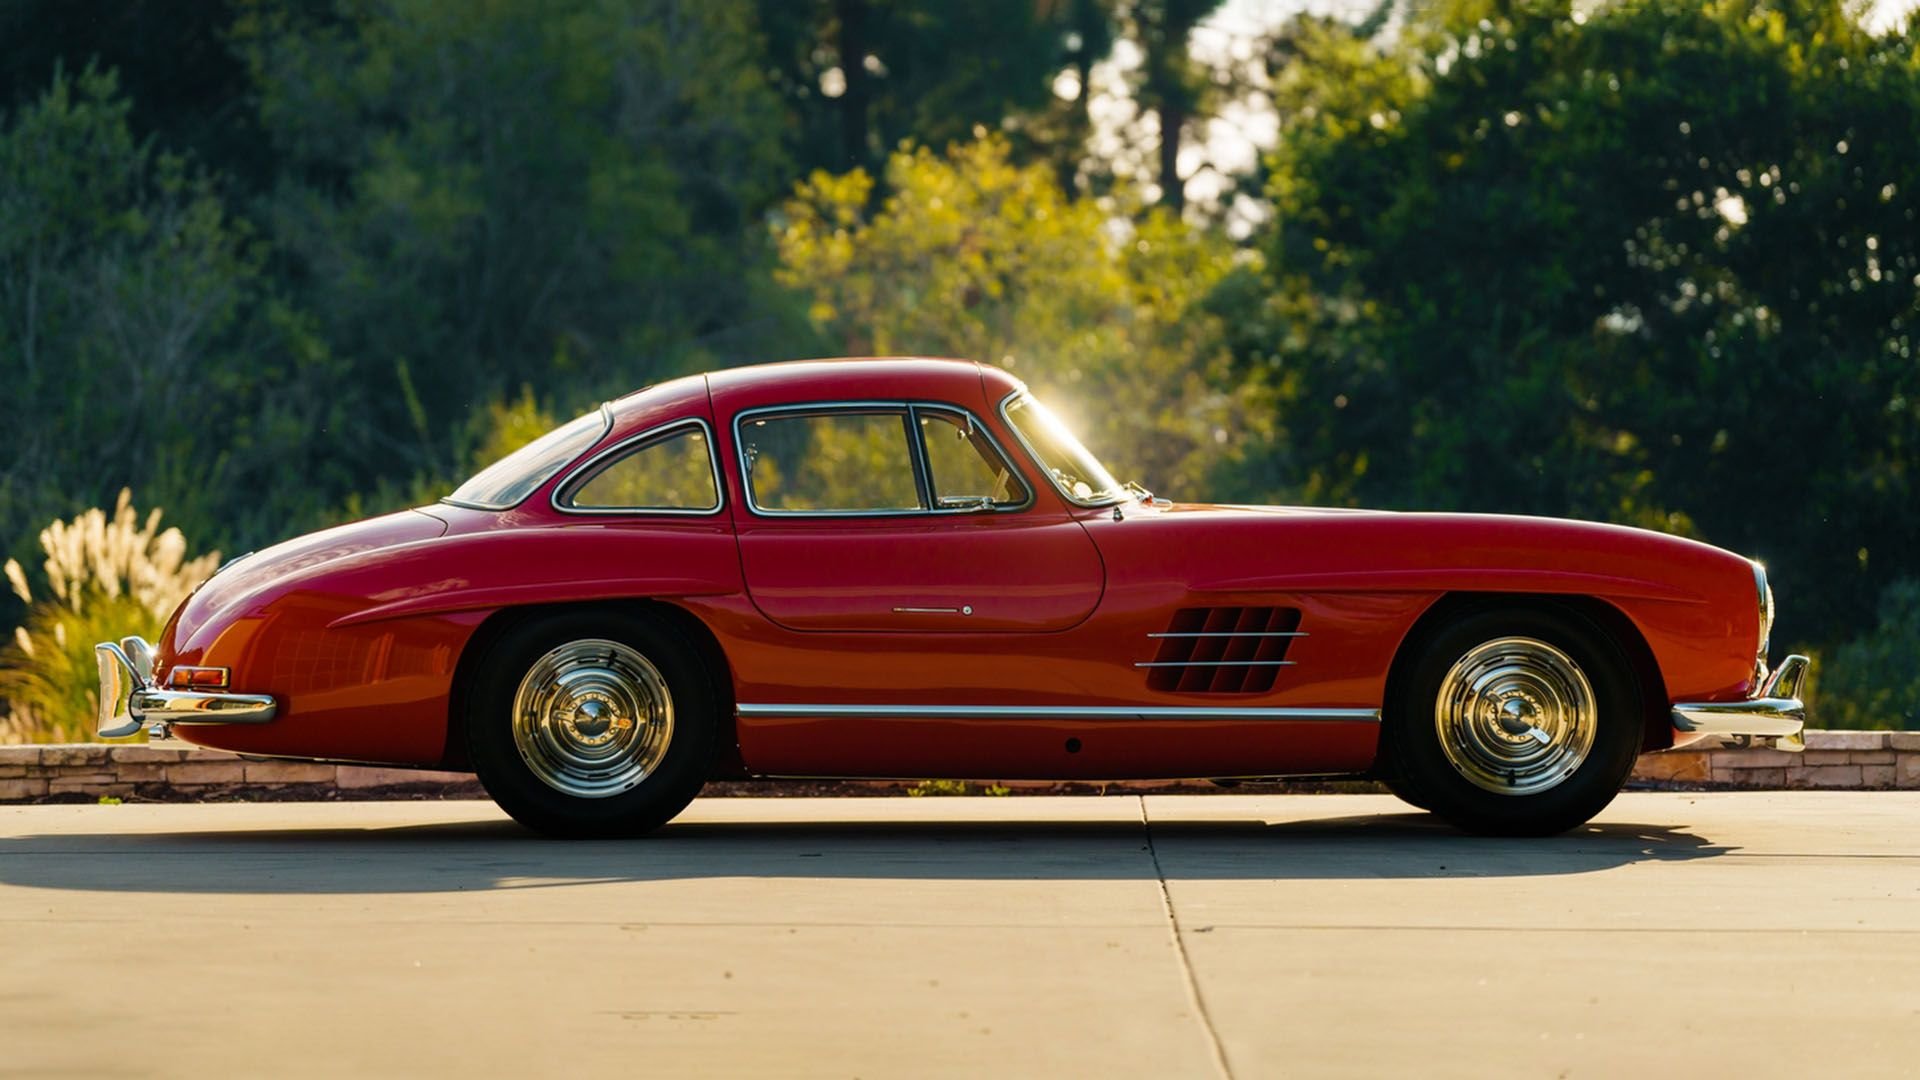 For Sale 1956 Mercedes-Benz 300 SL "Gullwing" Coupe